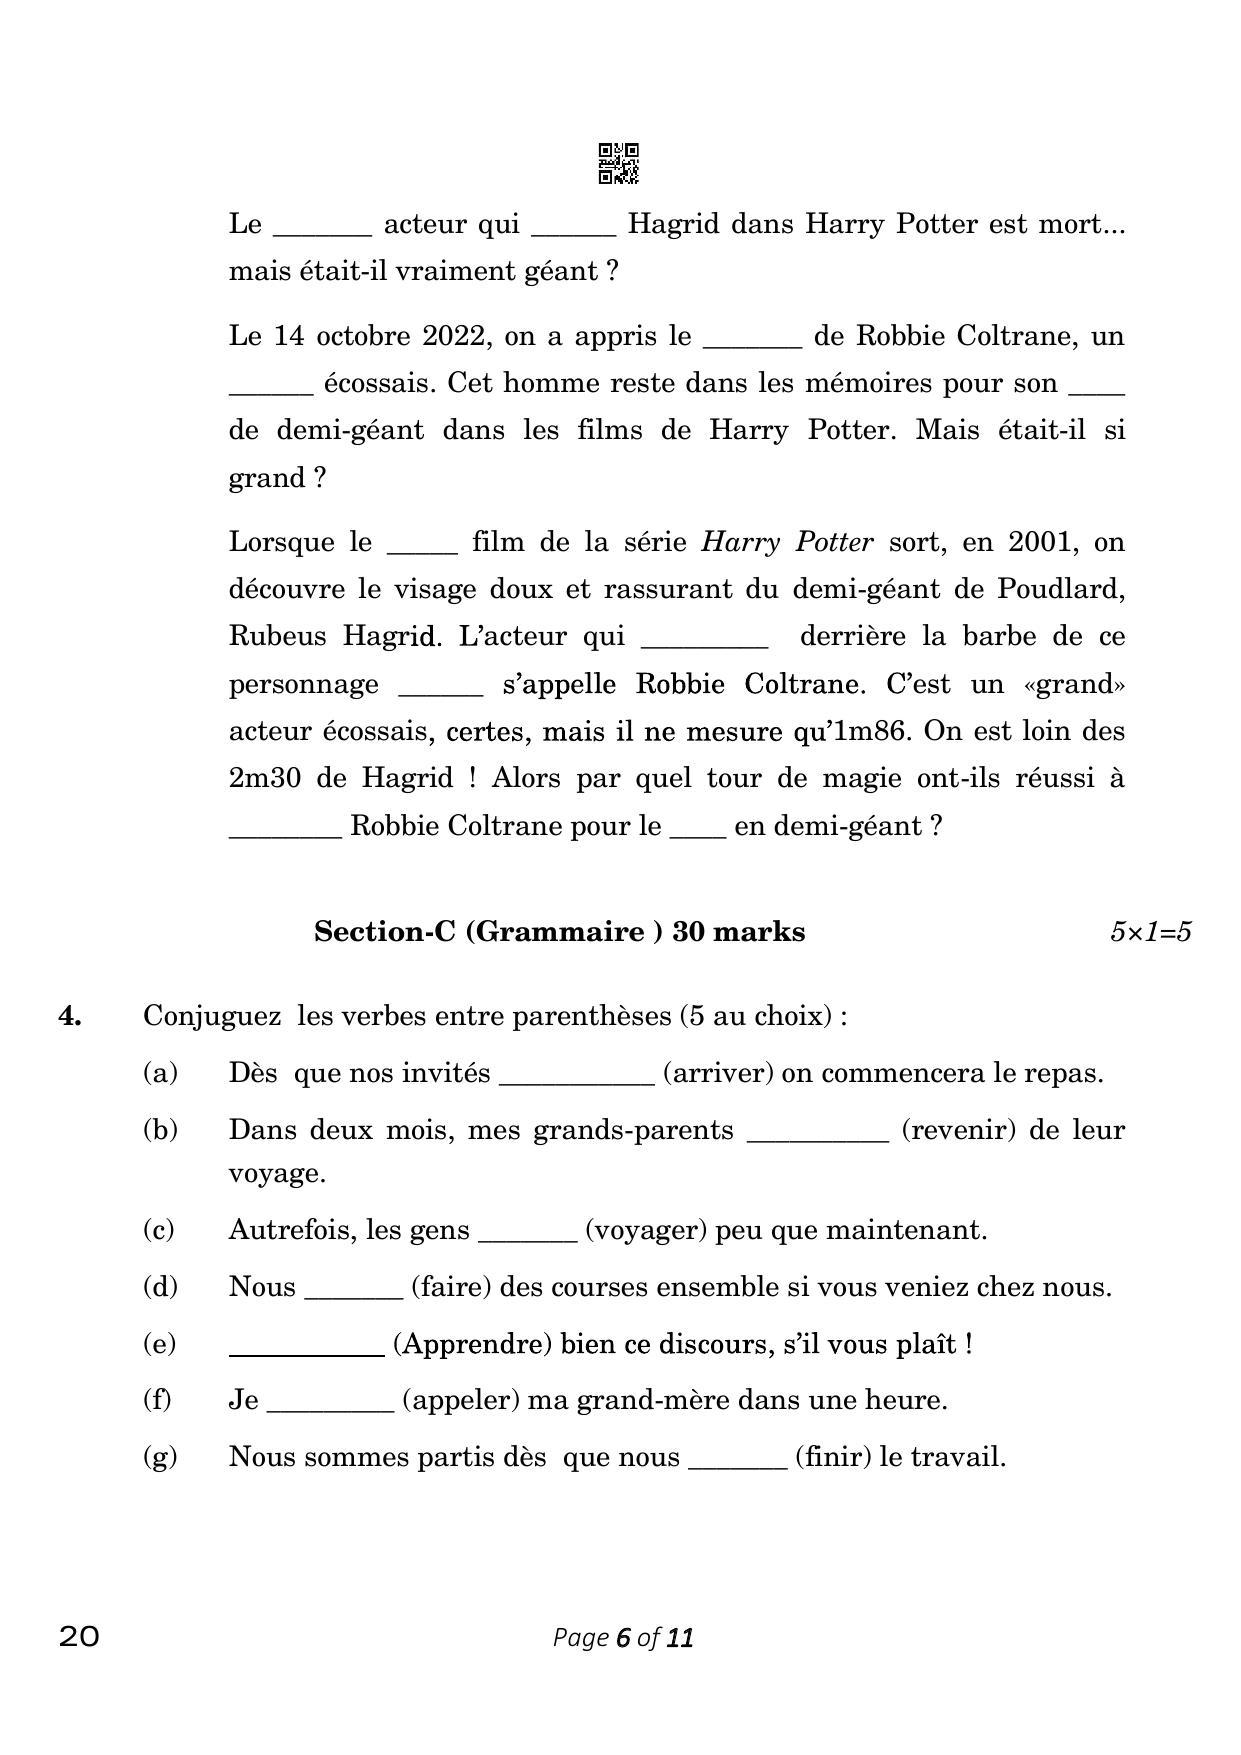 CBSE Class 10 French (Compartment) 2023 Question Paper - Page 6